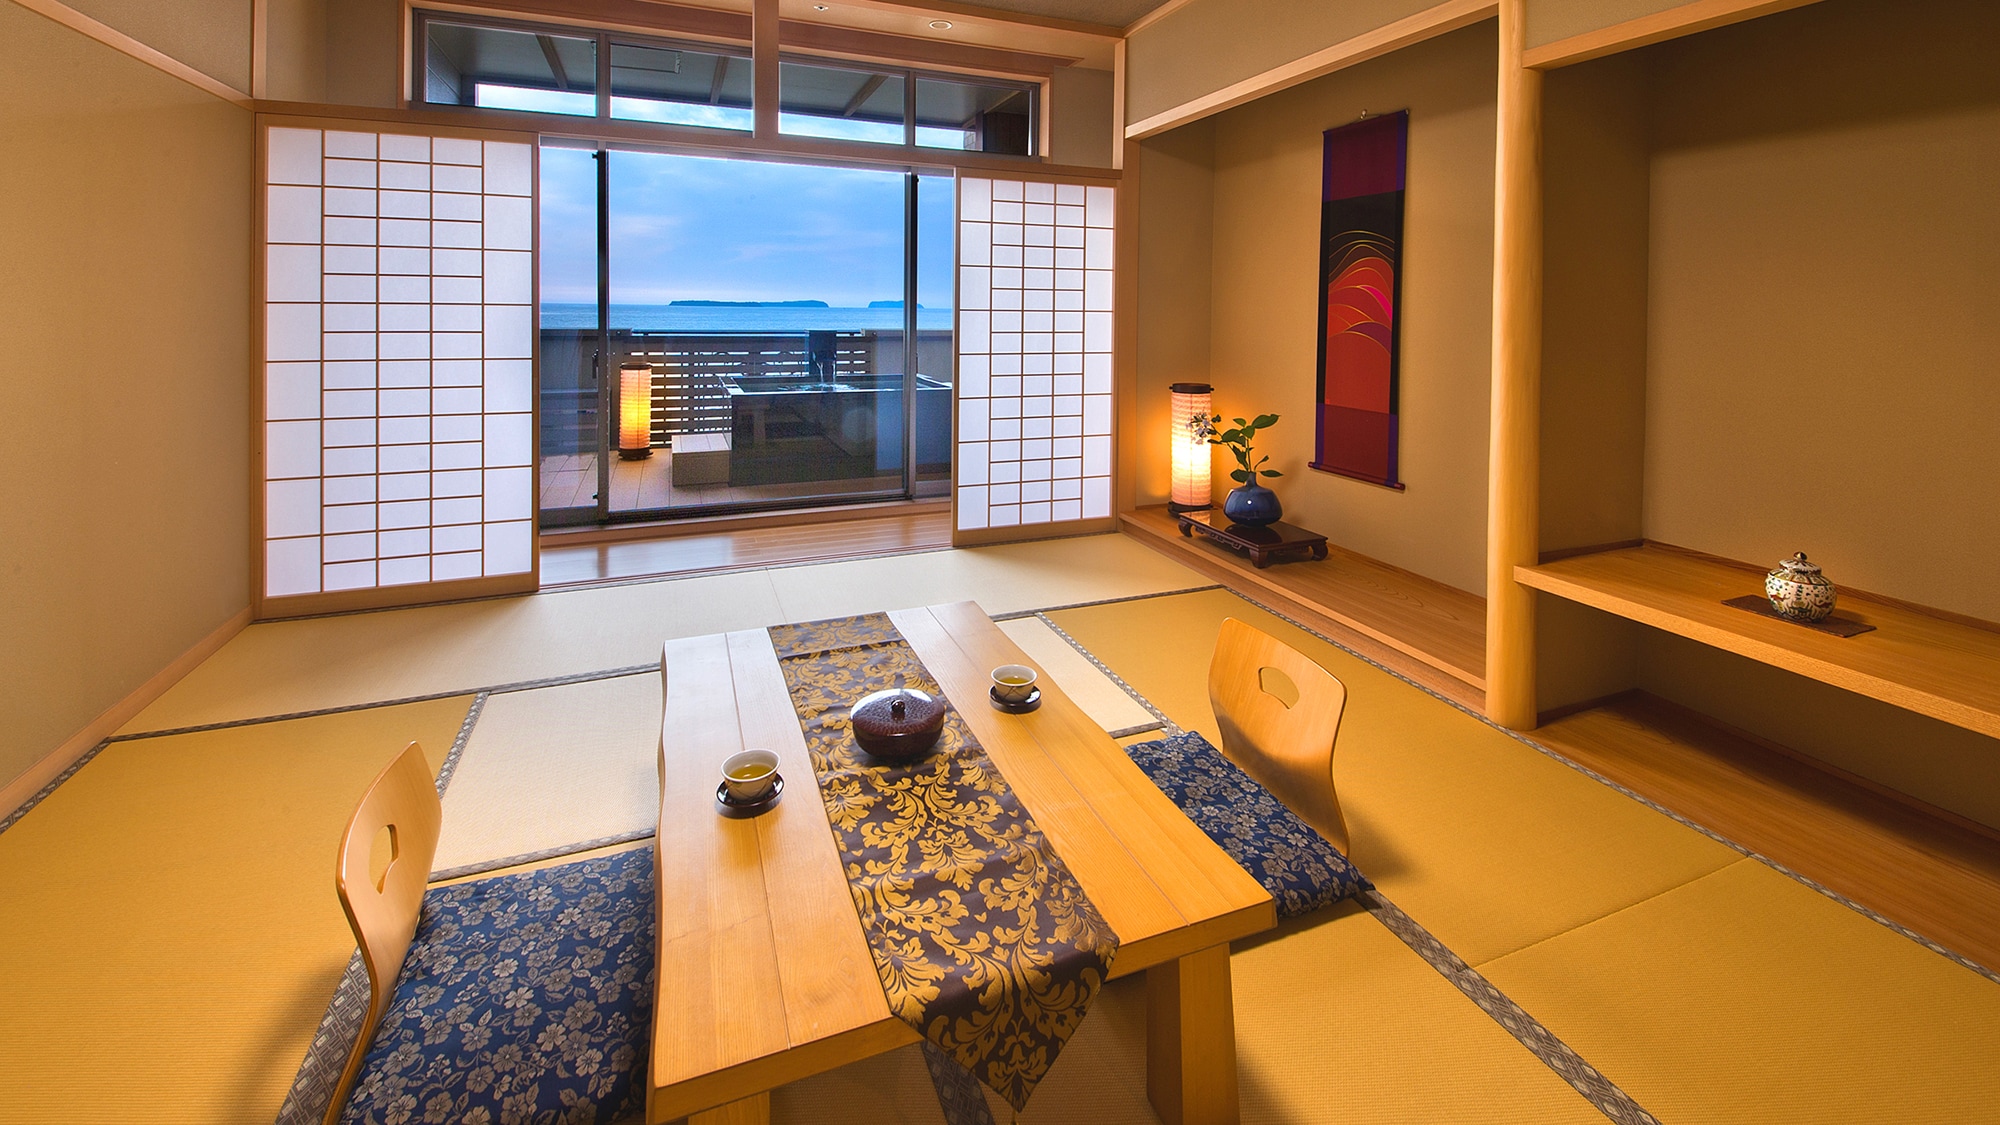 ◆ Japanese-style room with dew ◆